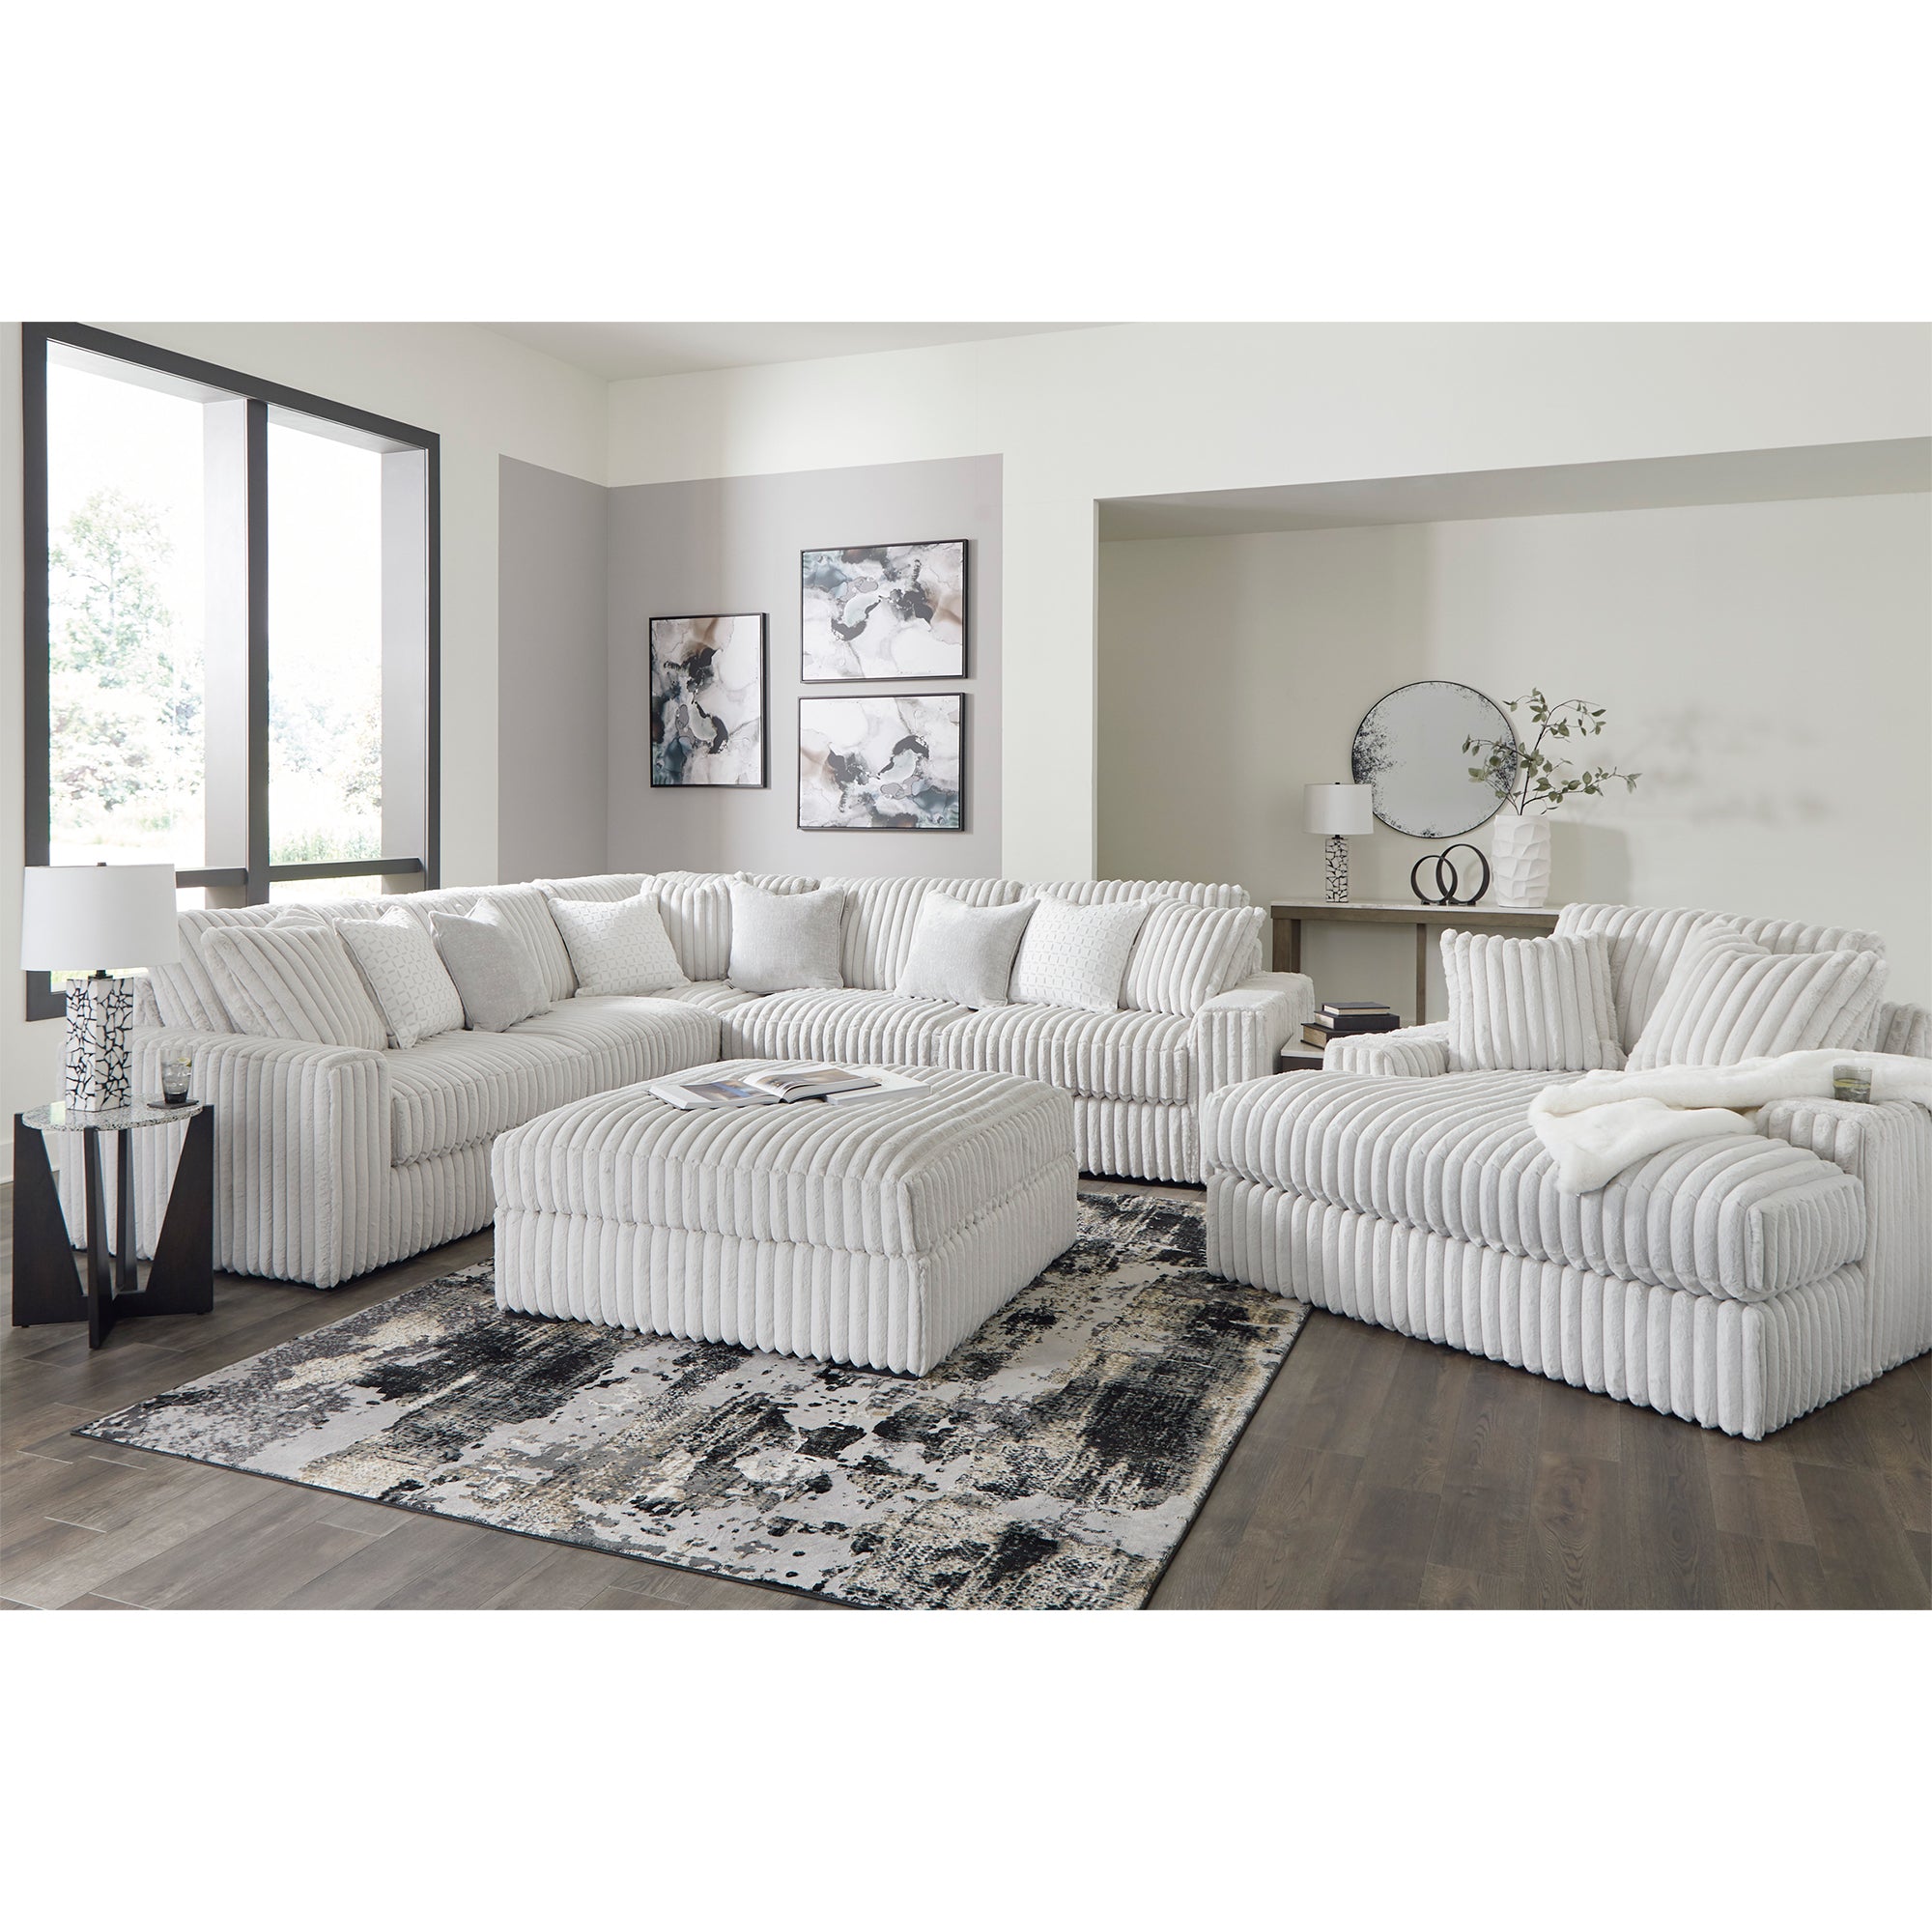 Elegant Stupendous Sectional with loose reversible cushions and plush feather-fiber blend, ideal for cozy living spaces